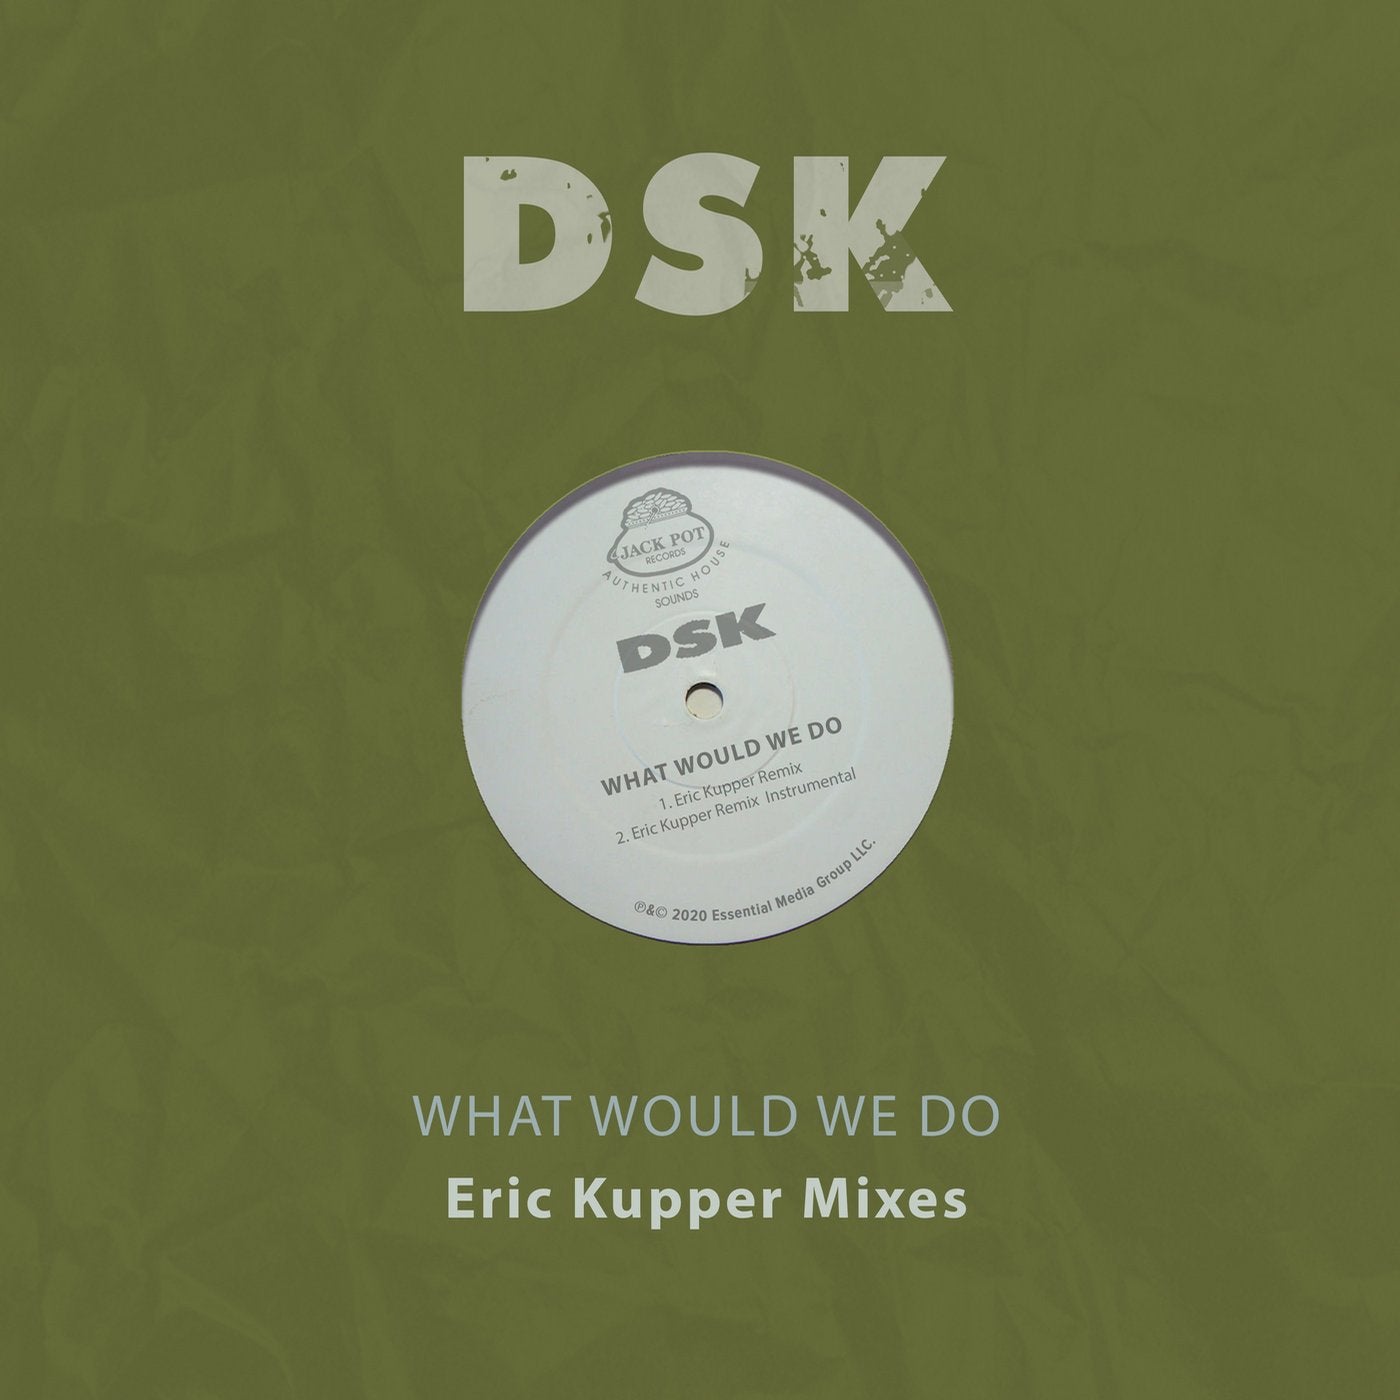 What Would We Do - Eric Kupper Mixes